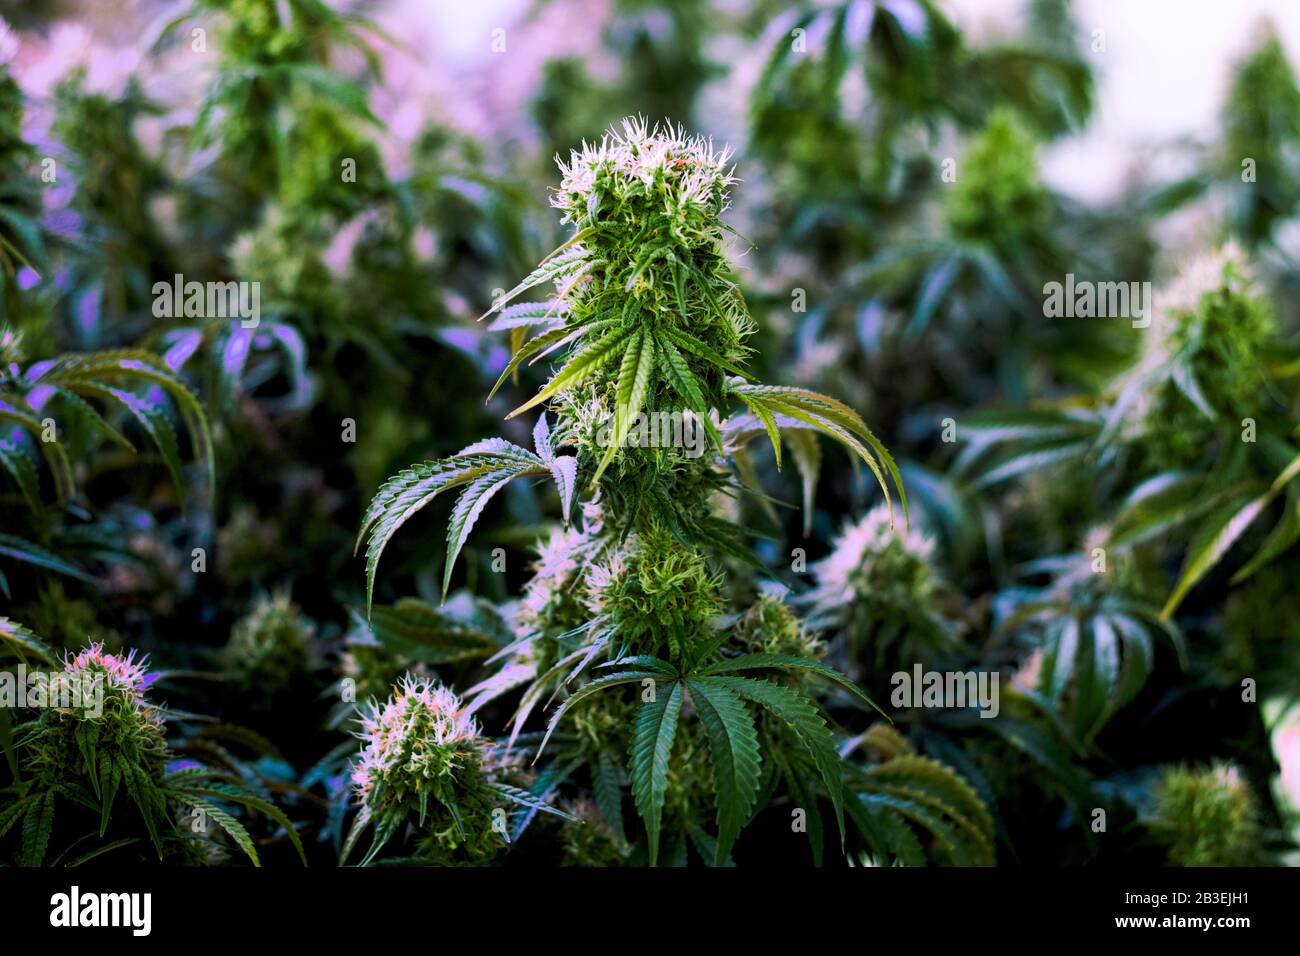 Mature indoor medical recreational marijuana cannabis industry plants with large developed cola flowers Stock Photo